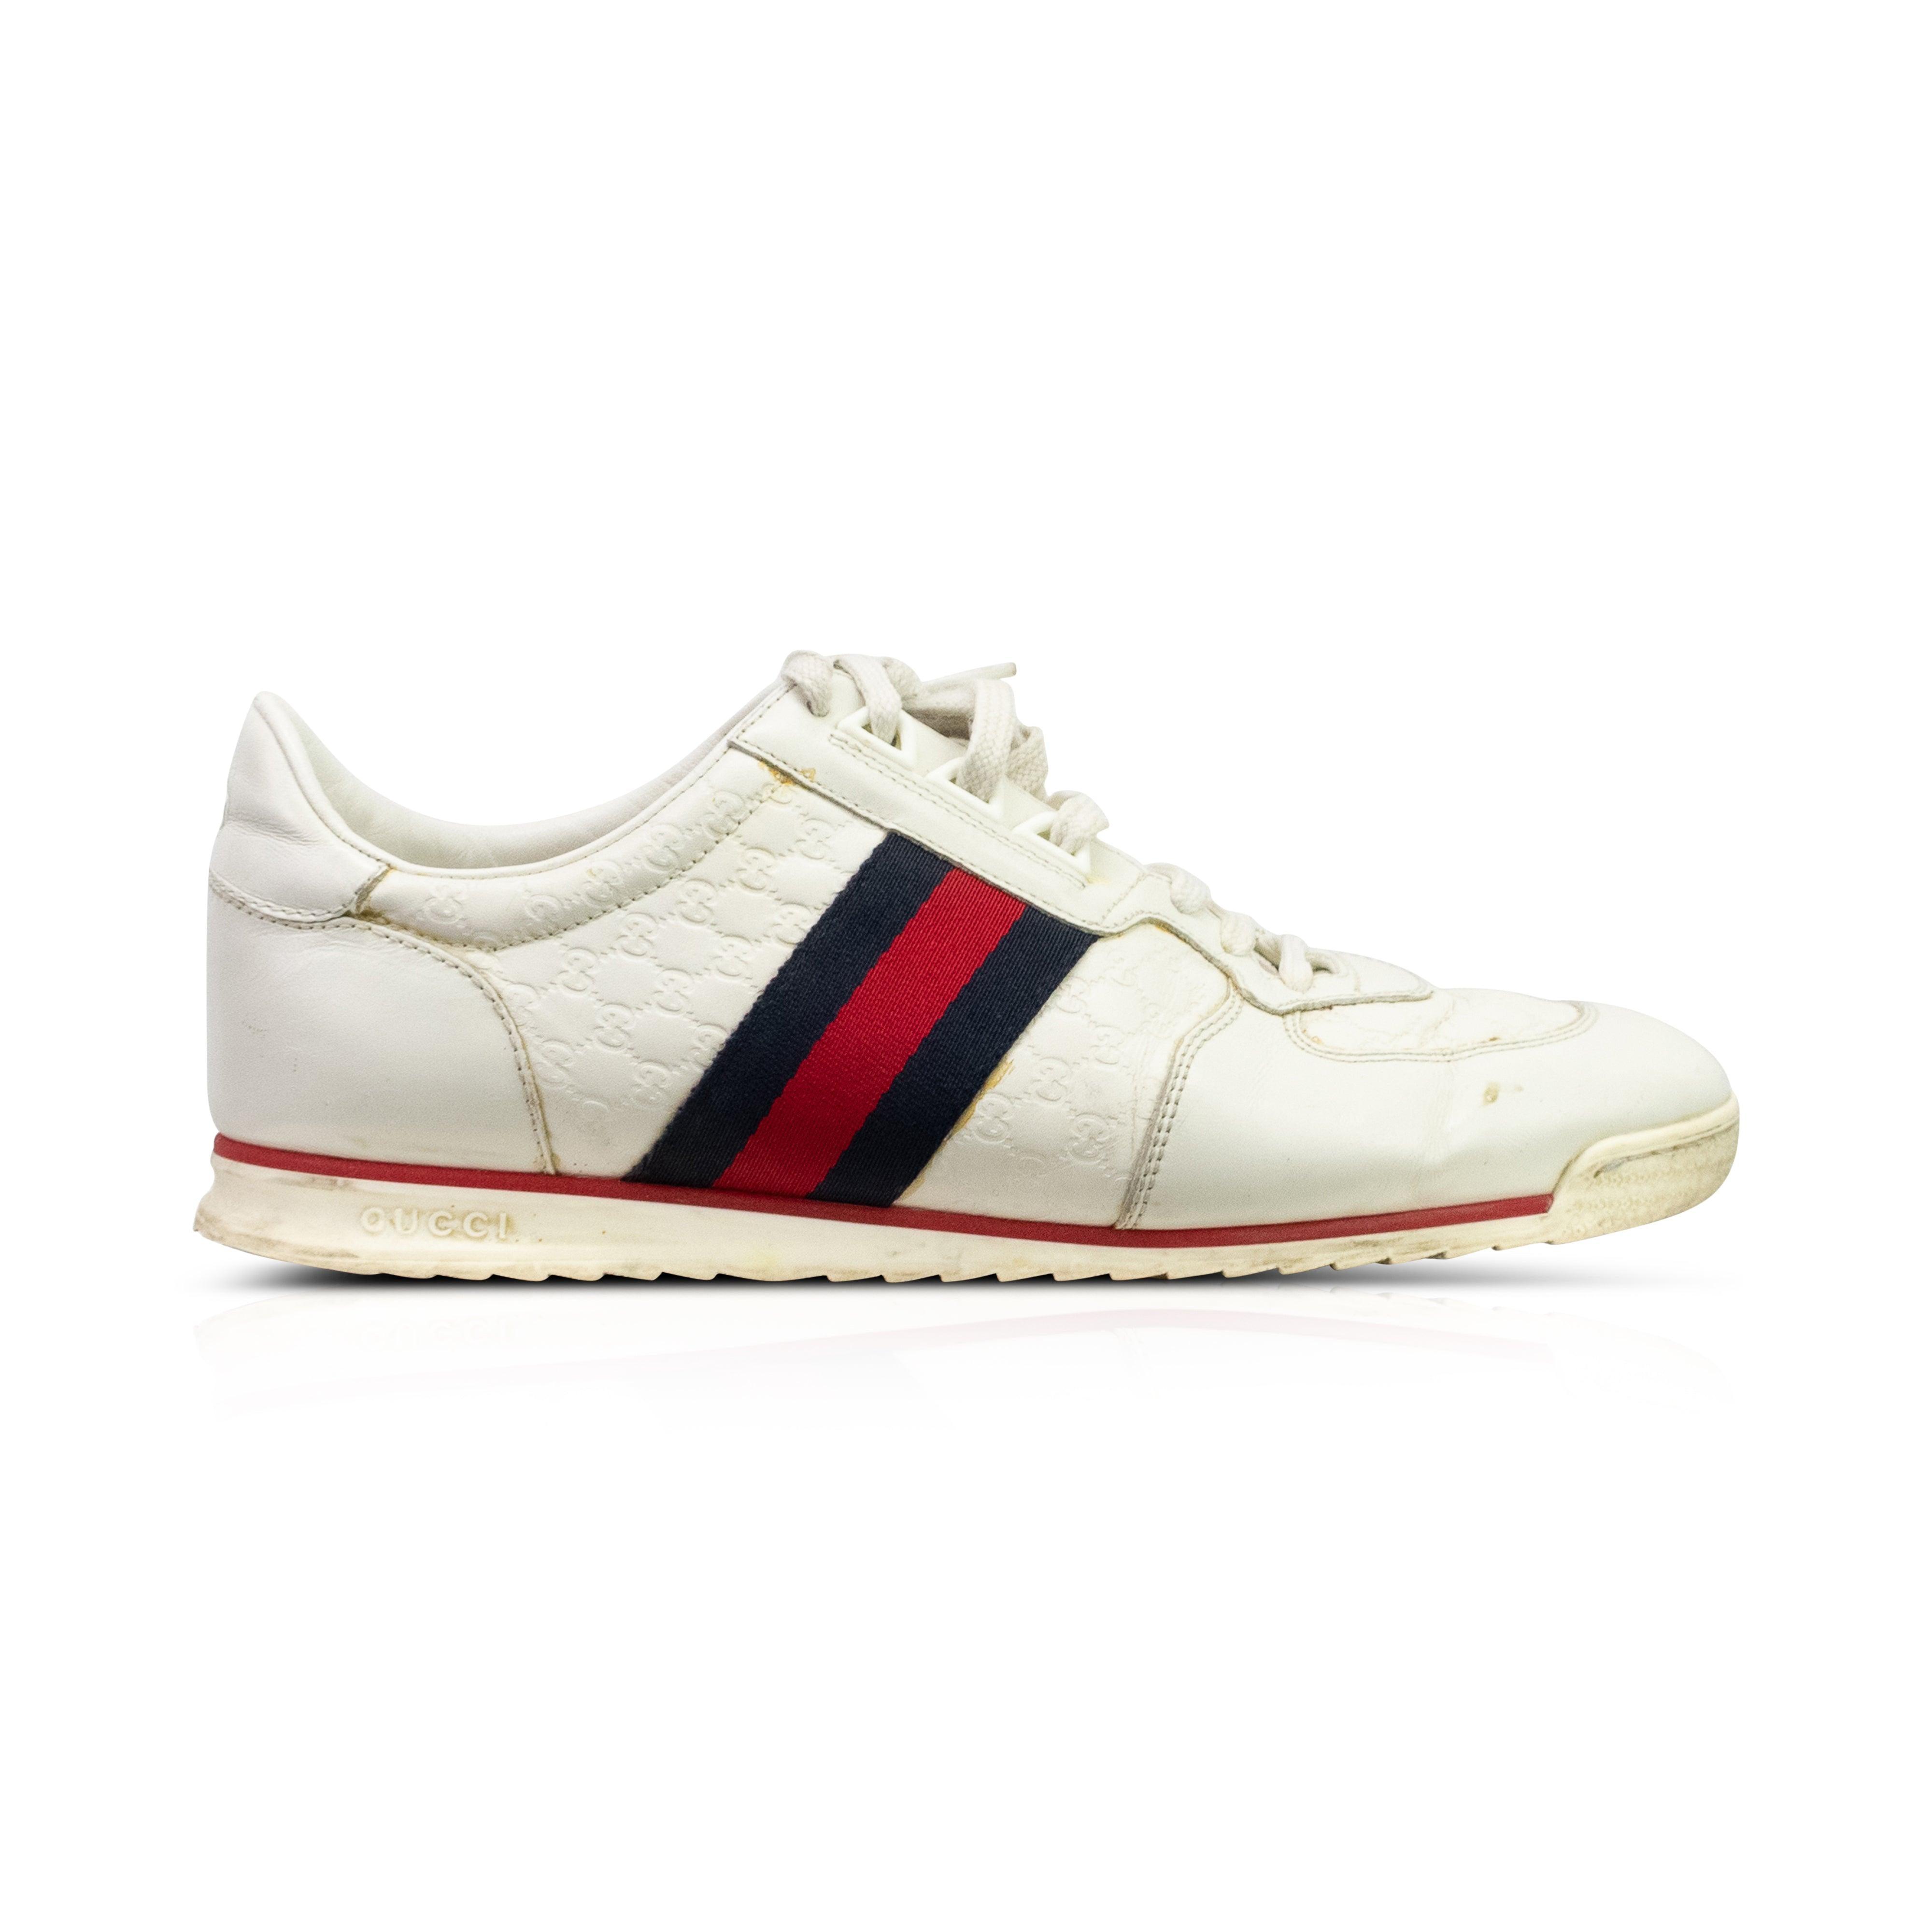 Gucci x Adidas 'ZX8000' Sneakers - Men's 10.5 | Fashionably Yours